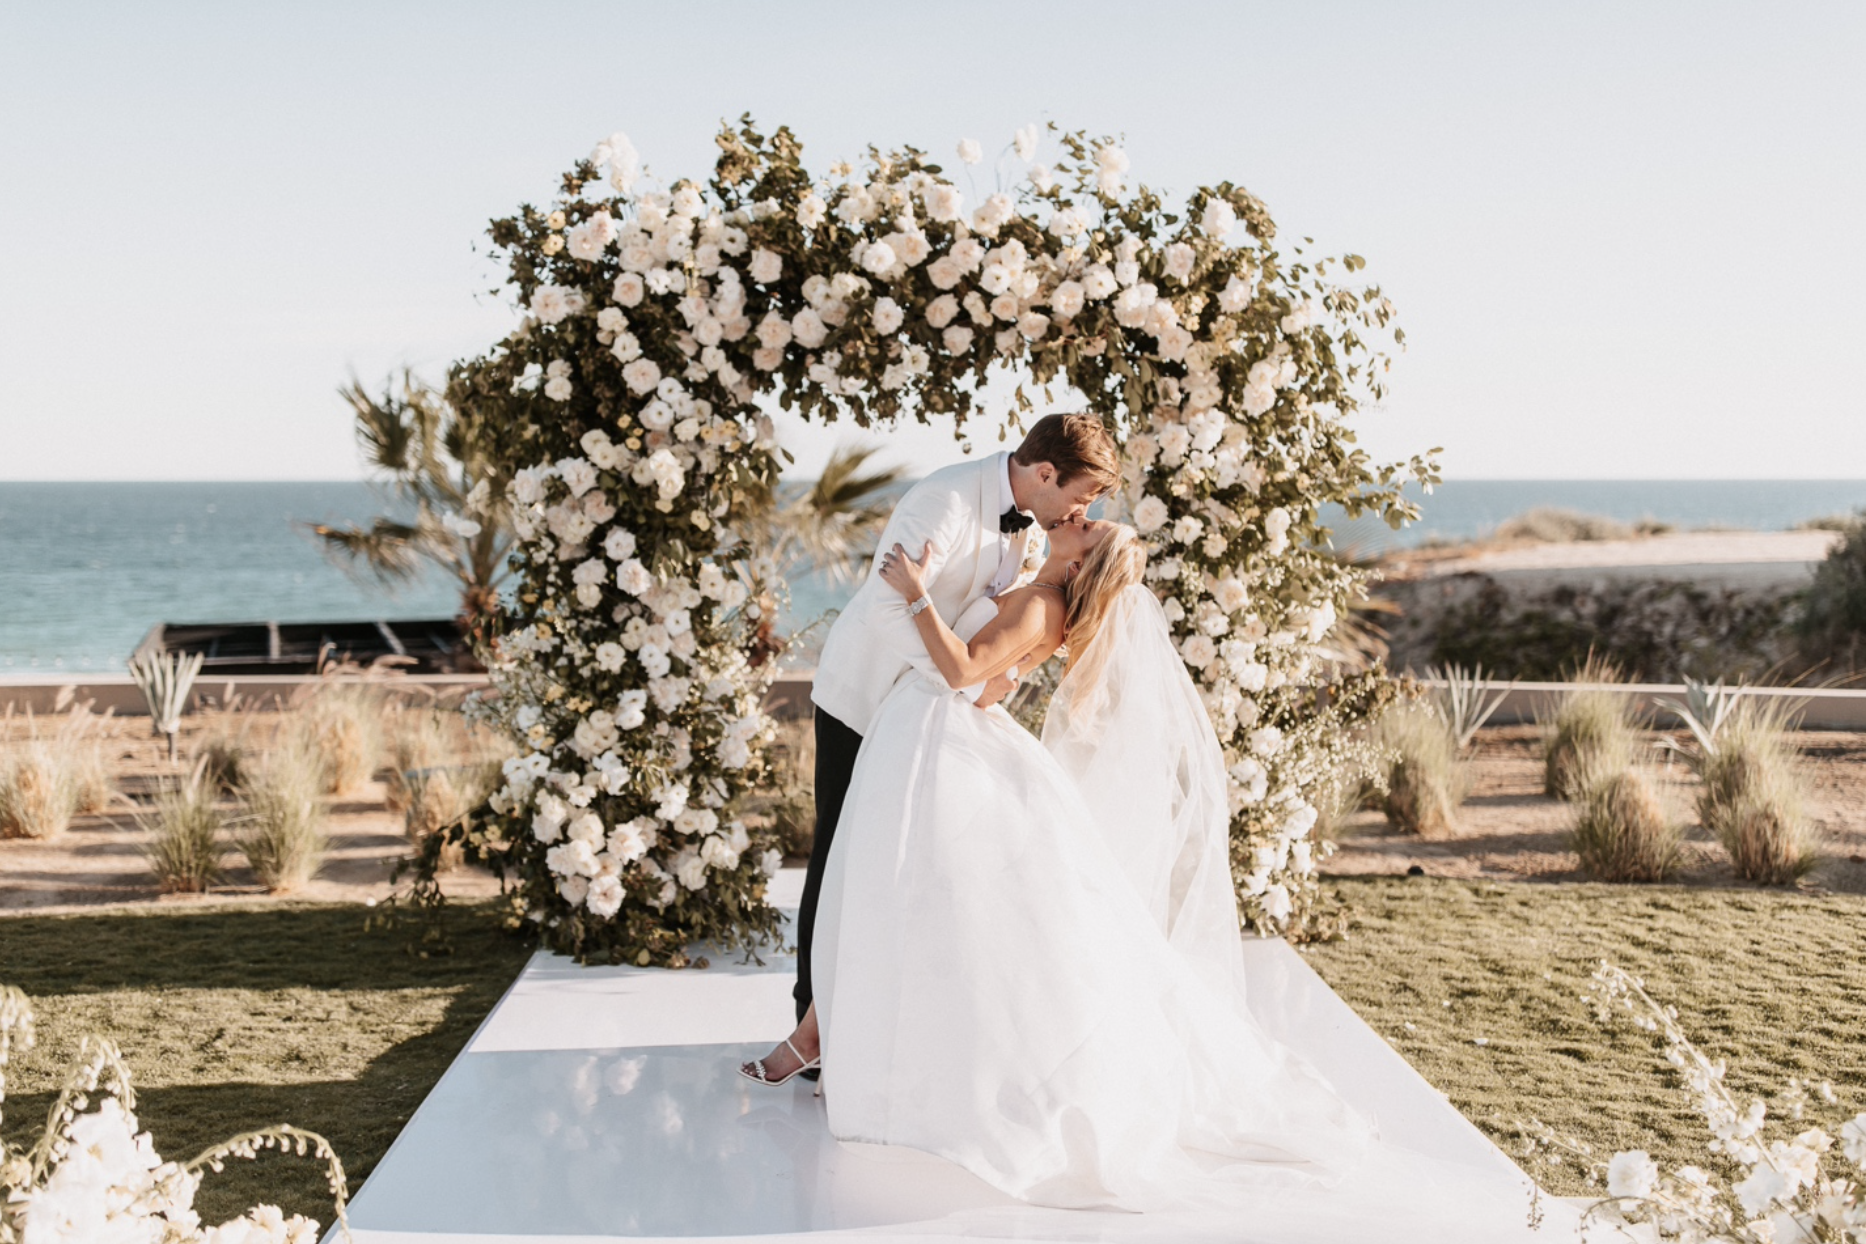 The Ultimate Guide To A Destination Wedding In Cabo